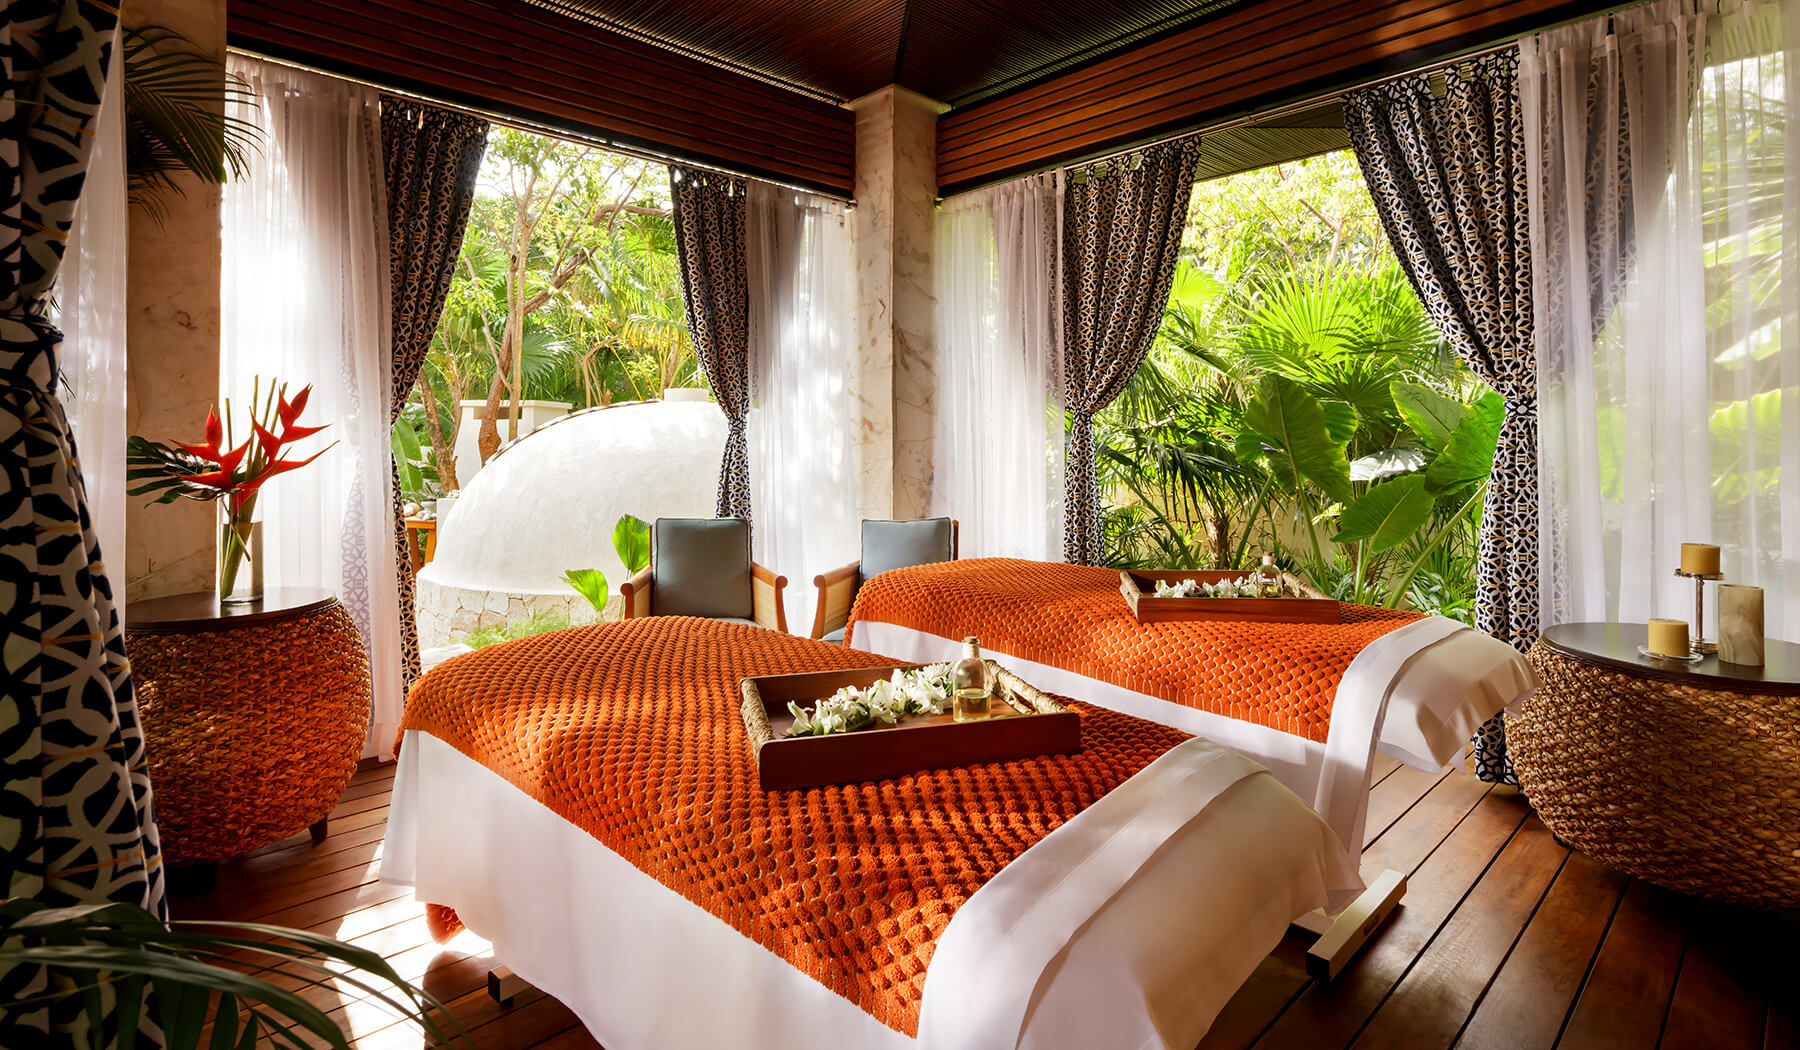 massage beds in private palapa room open to lush jungle greenery